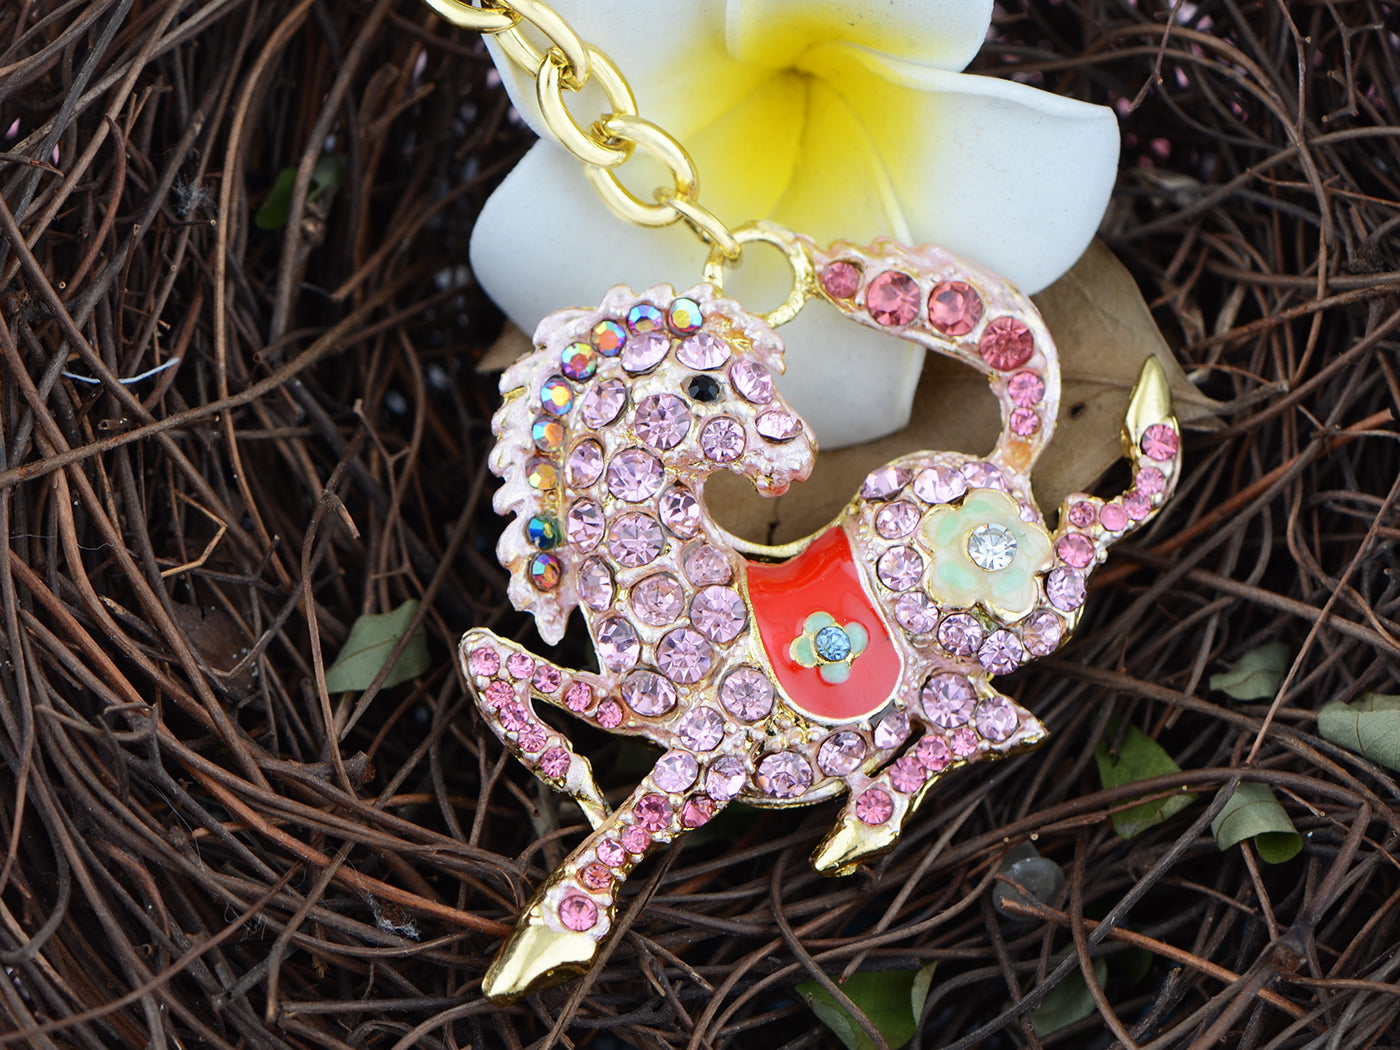 Sparkling Horse Key Chains For Women Girls Gifts Car Purse Animal Pendant Charms Pink